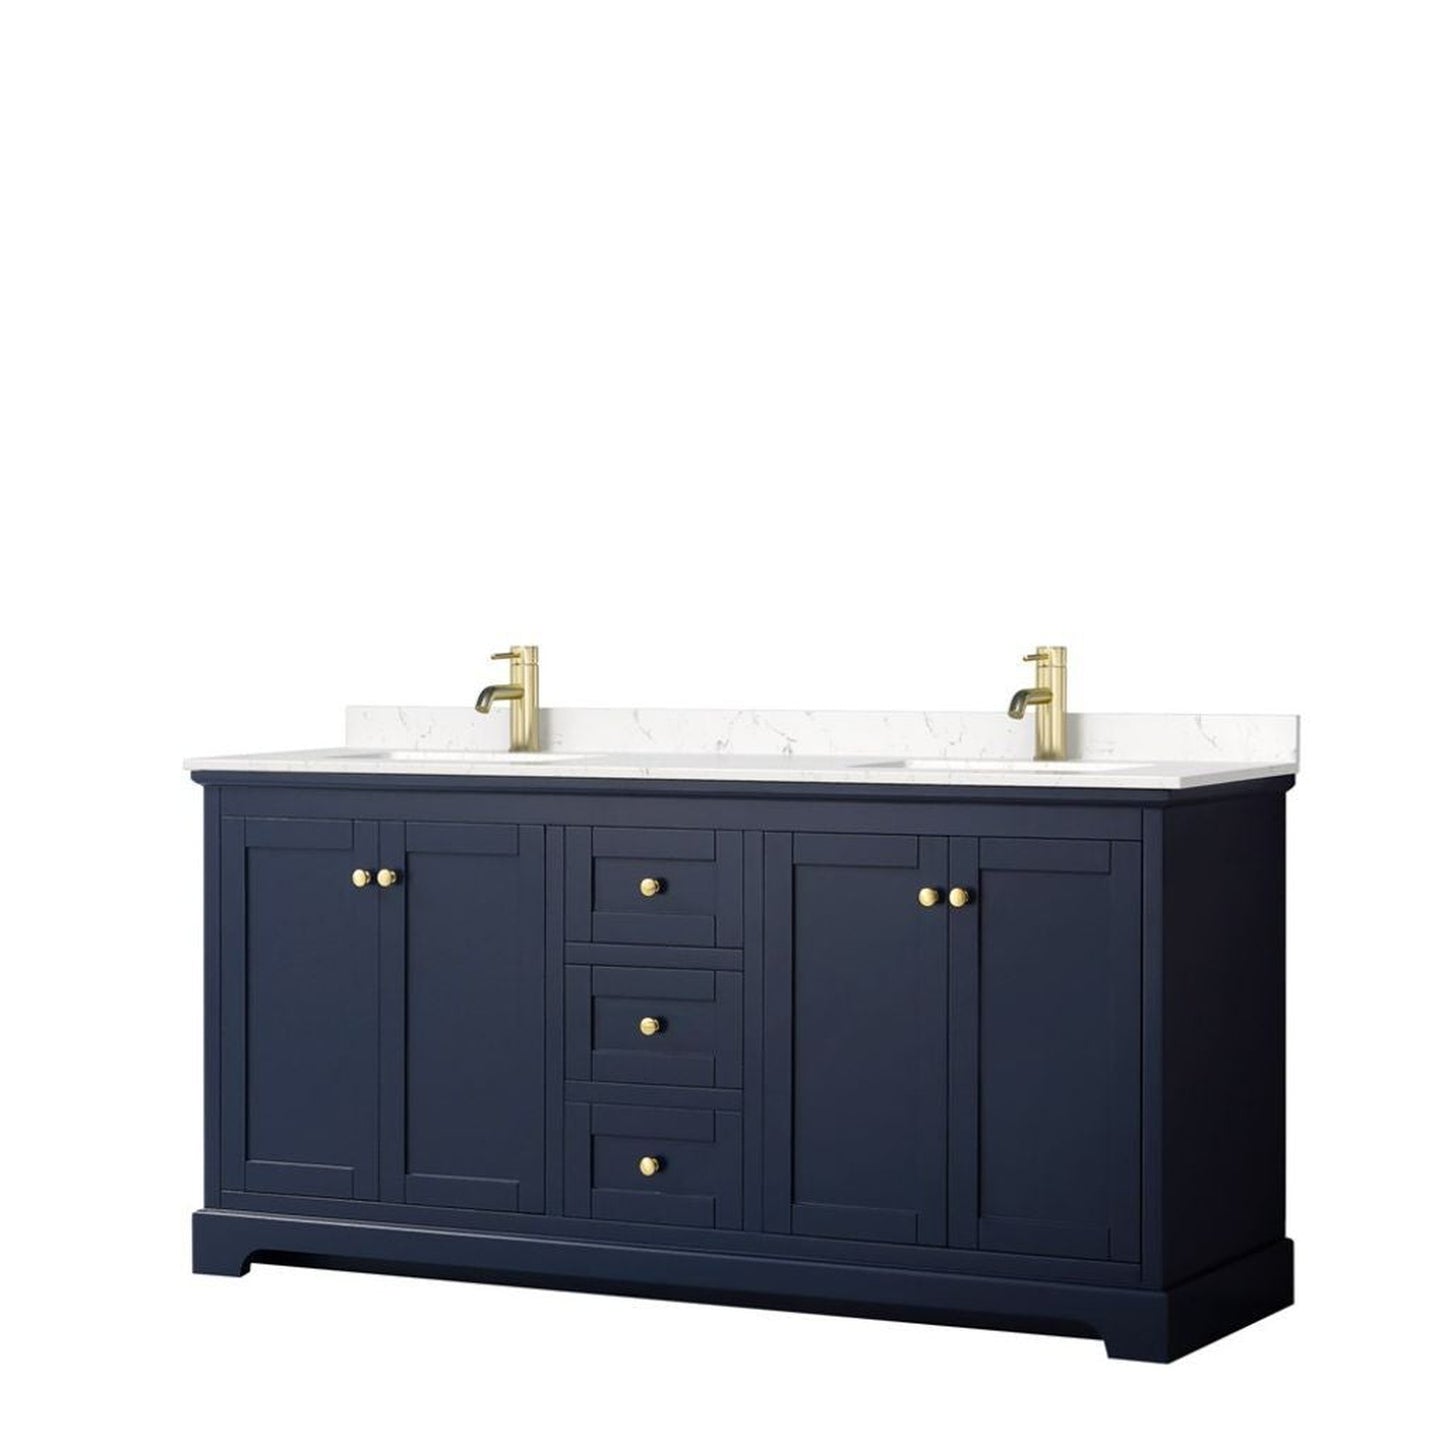 Wyndham Collection Avery 72" Dark Blue Double Bathroom Vanity With Light-Vein Cultured Marble Countertop With 1-Hole Faucet And Square Sink